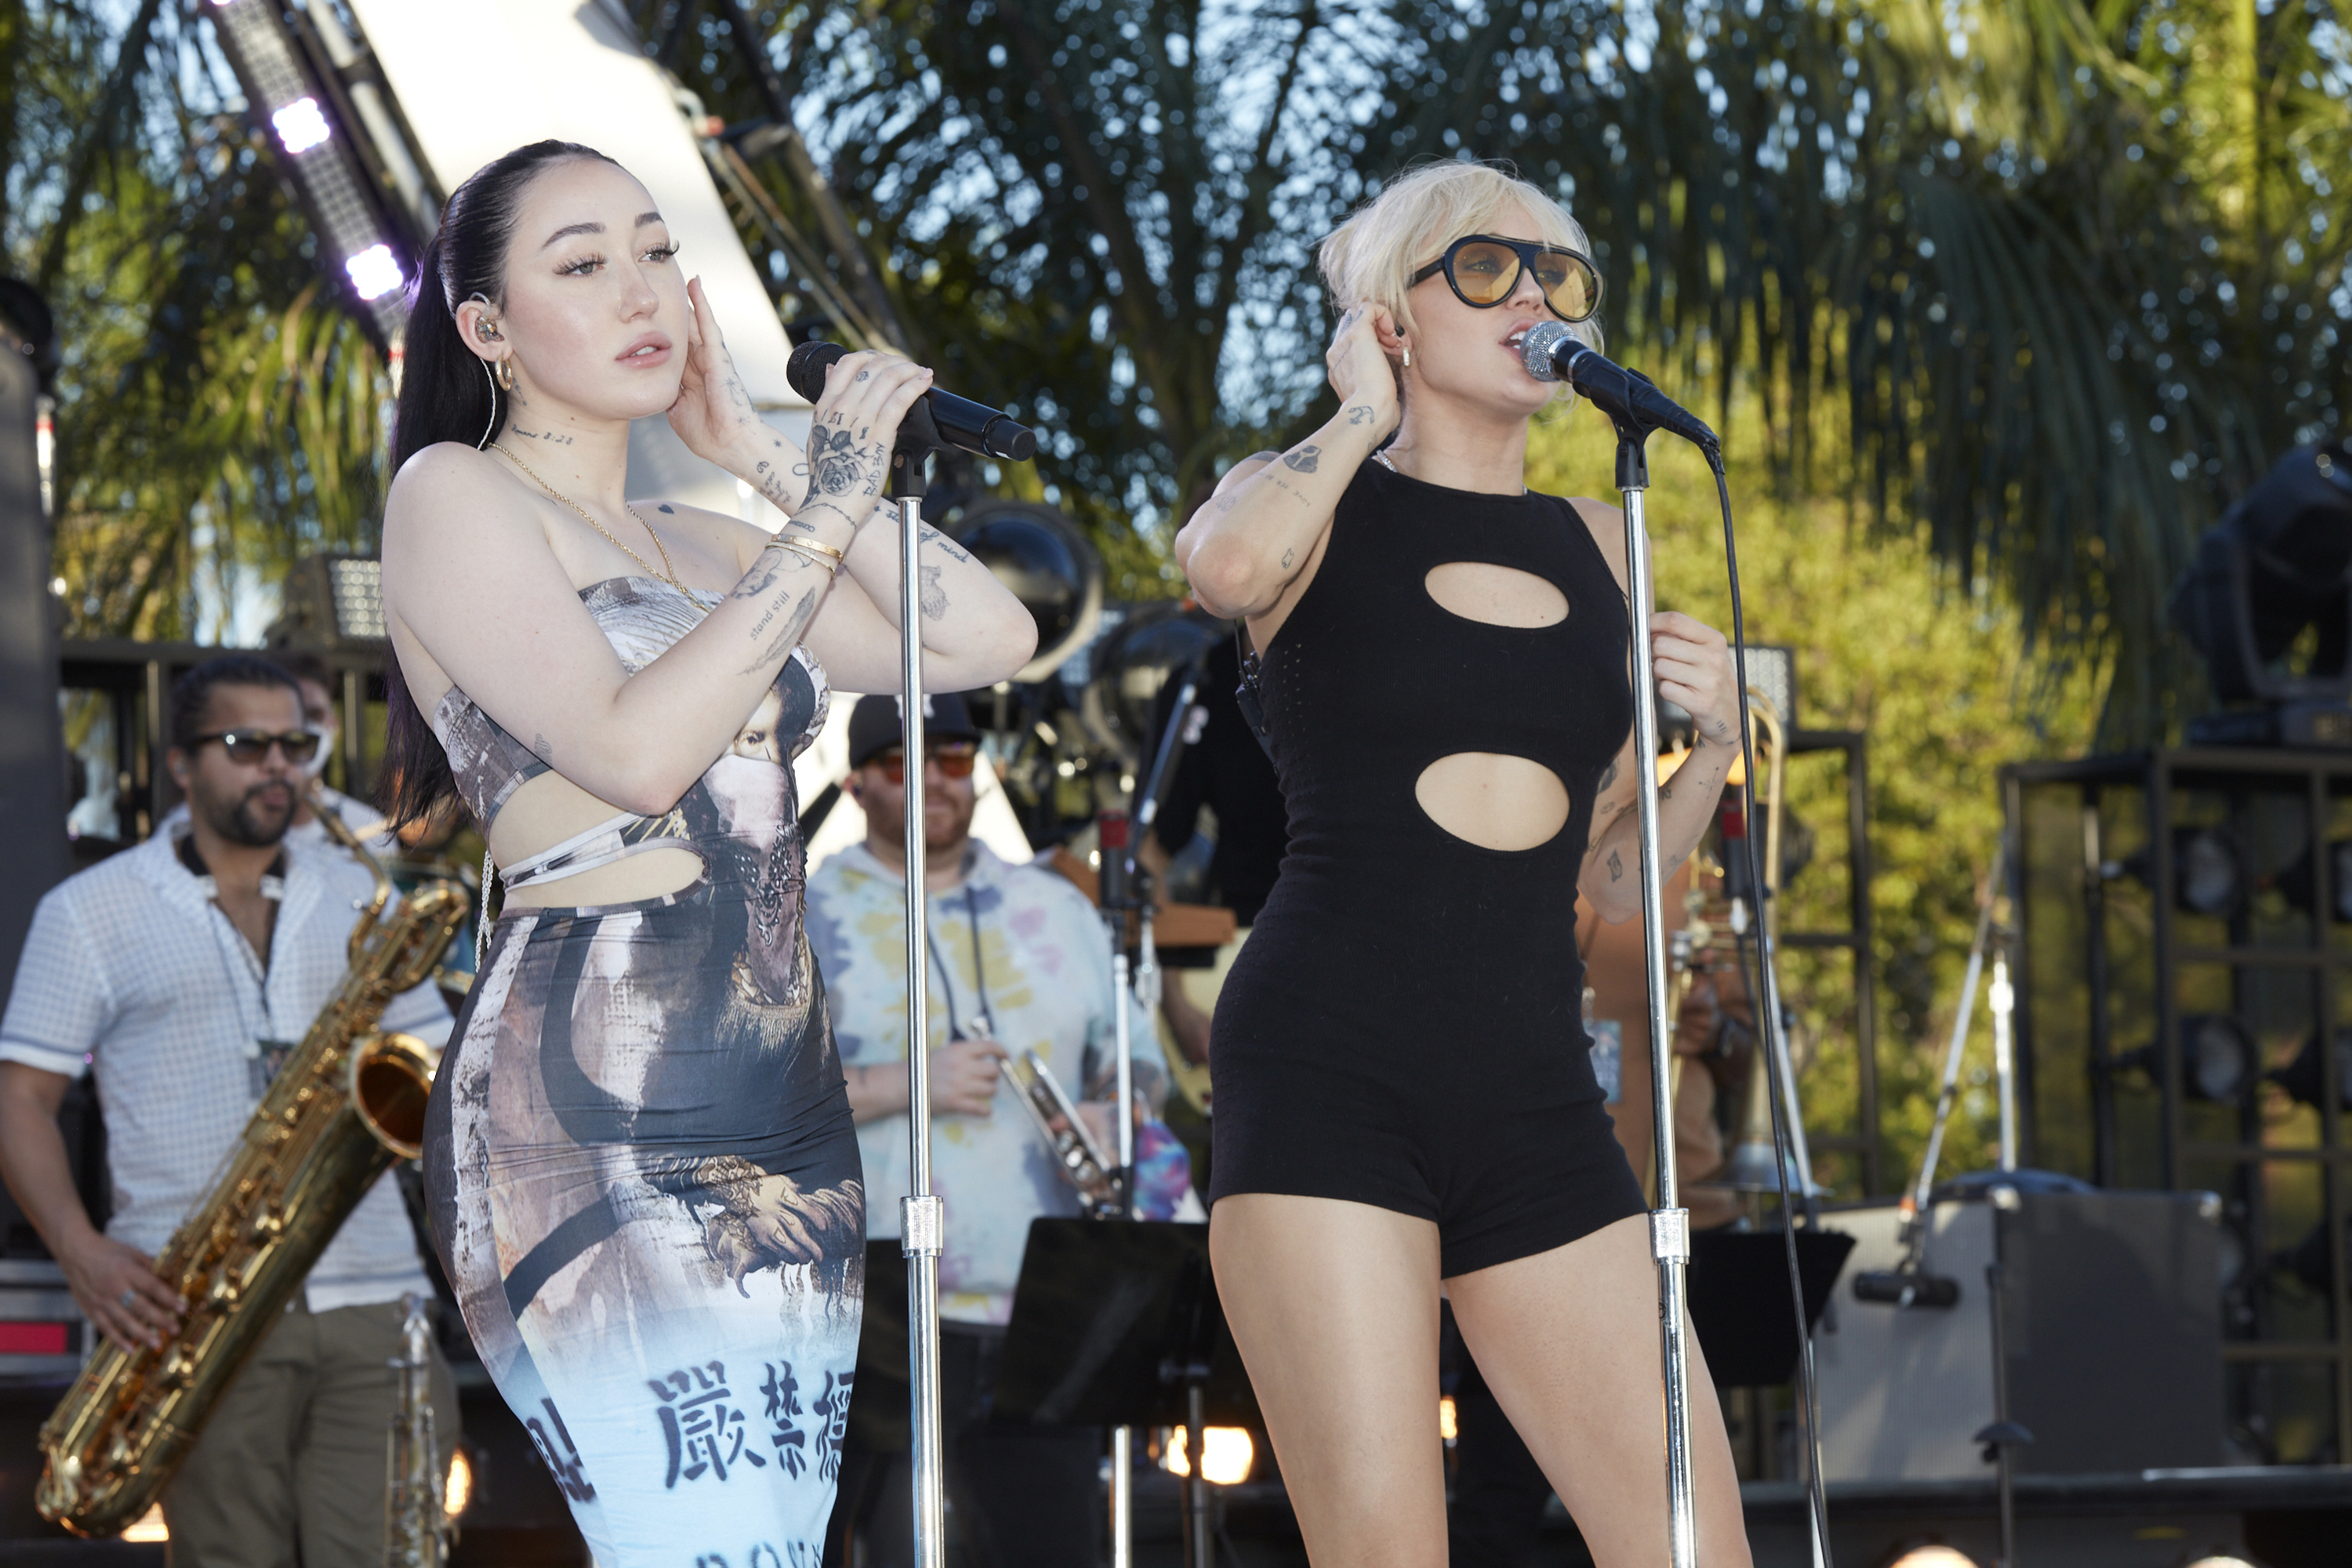 Noah and Miley onstage performing together